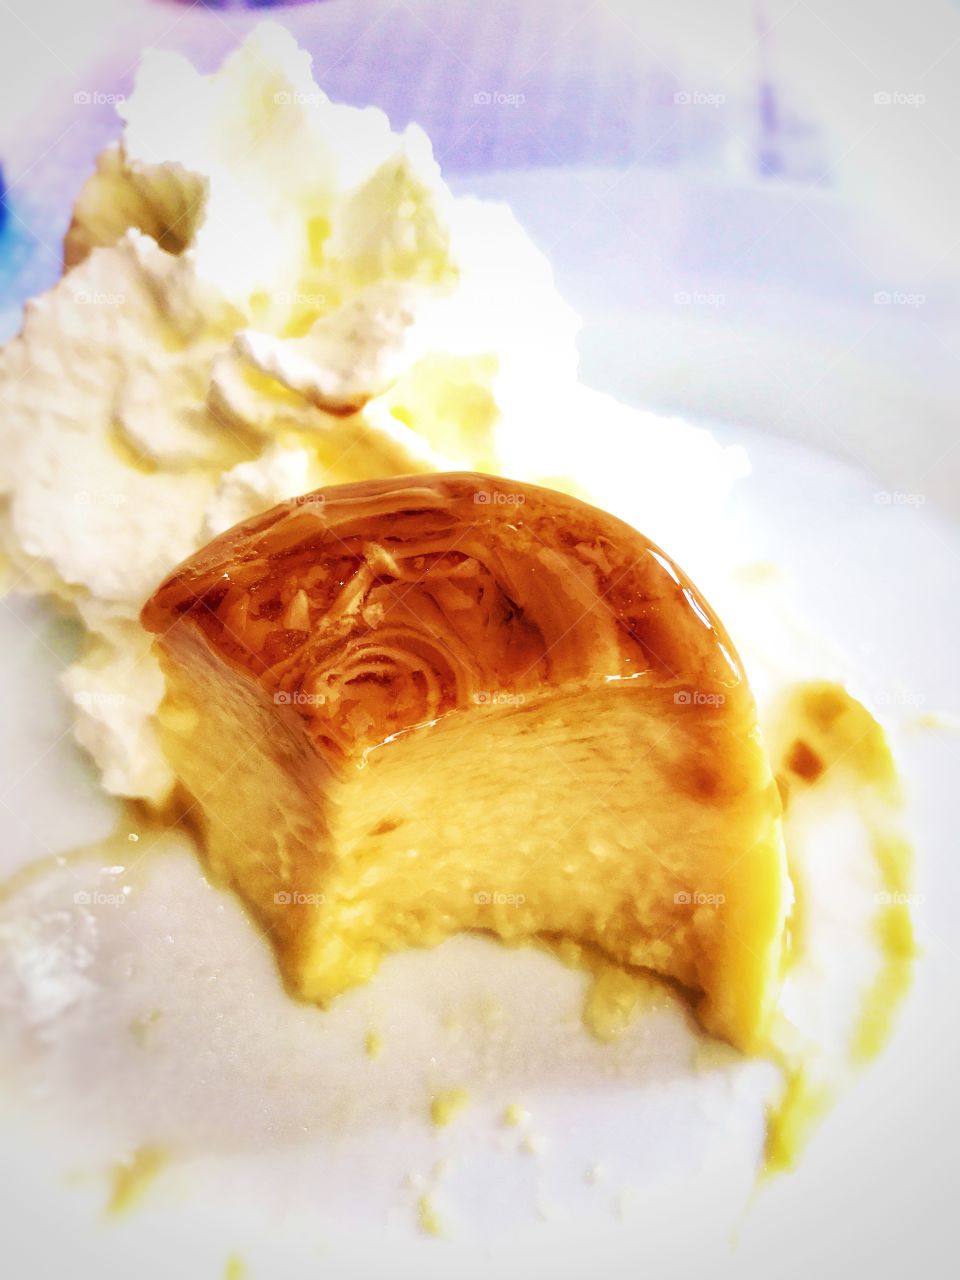 Flan with whipped cream